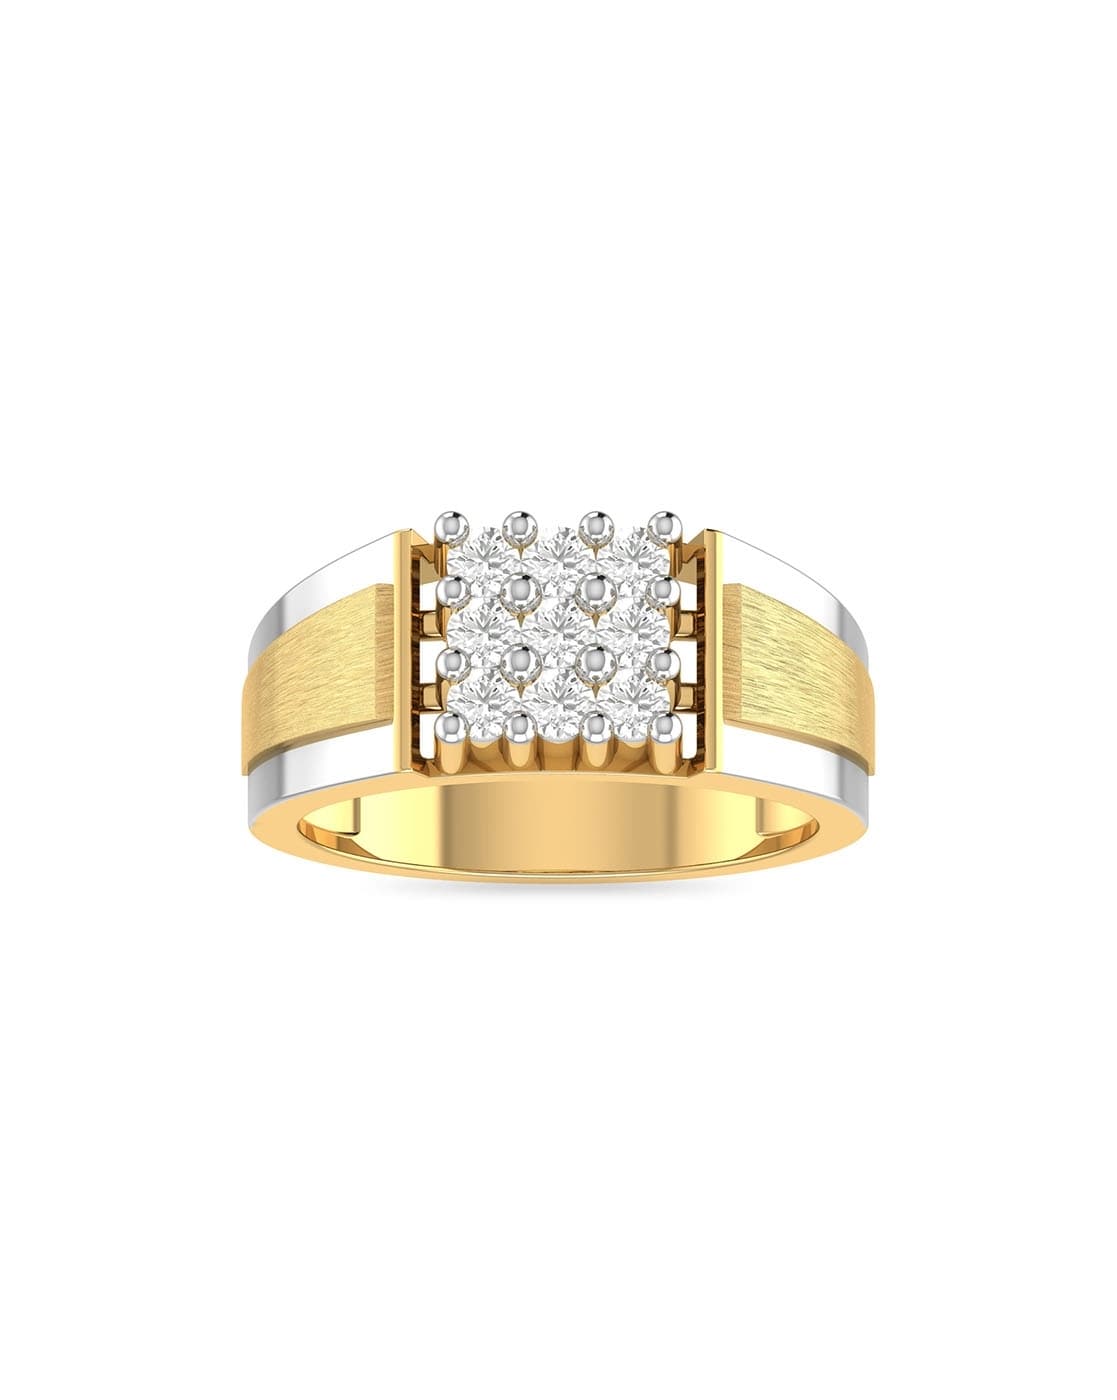 PC Jeweller - The Dottie gold ring exemplifies intricate... | Facebook